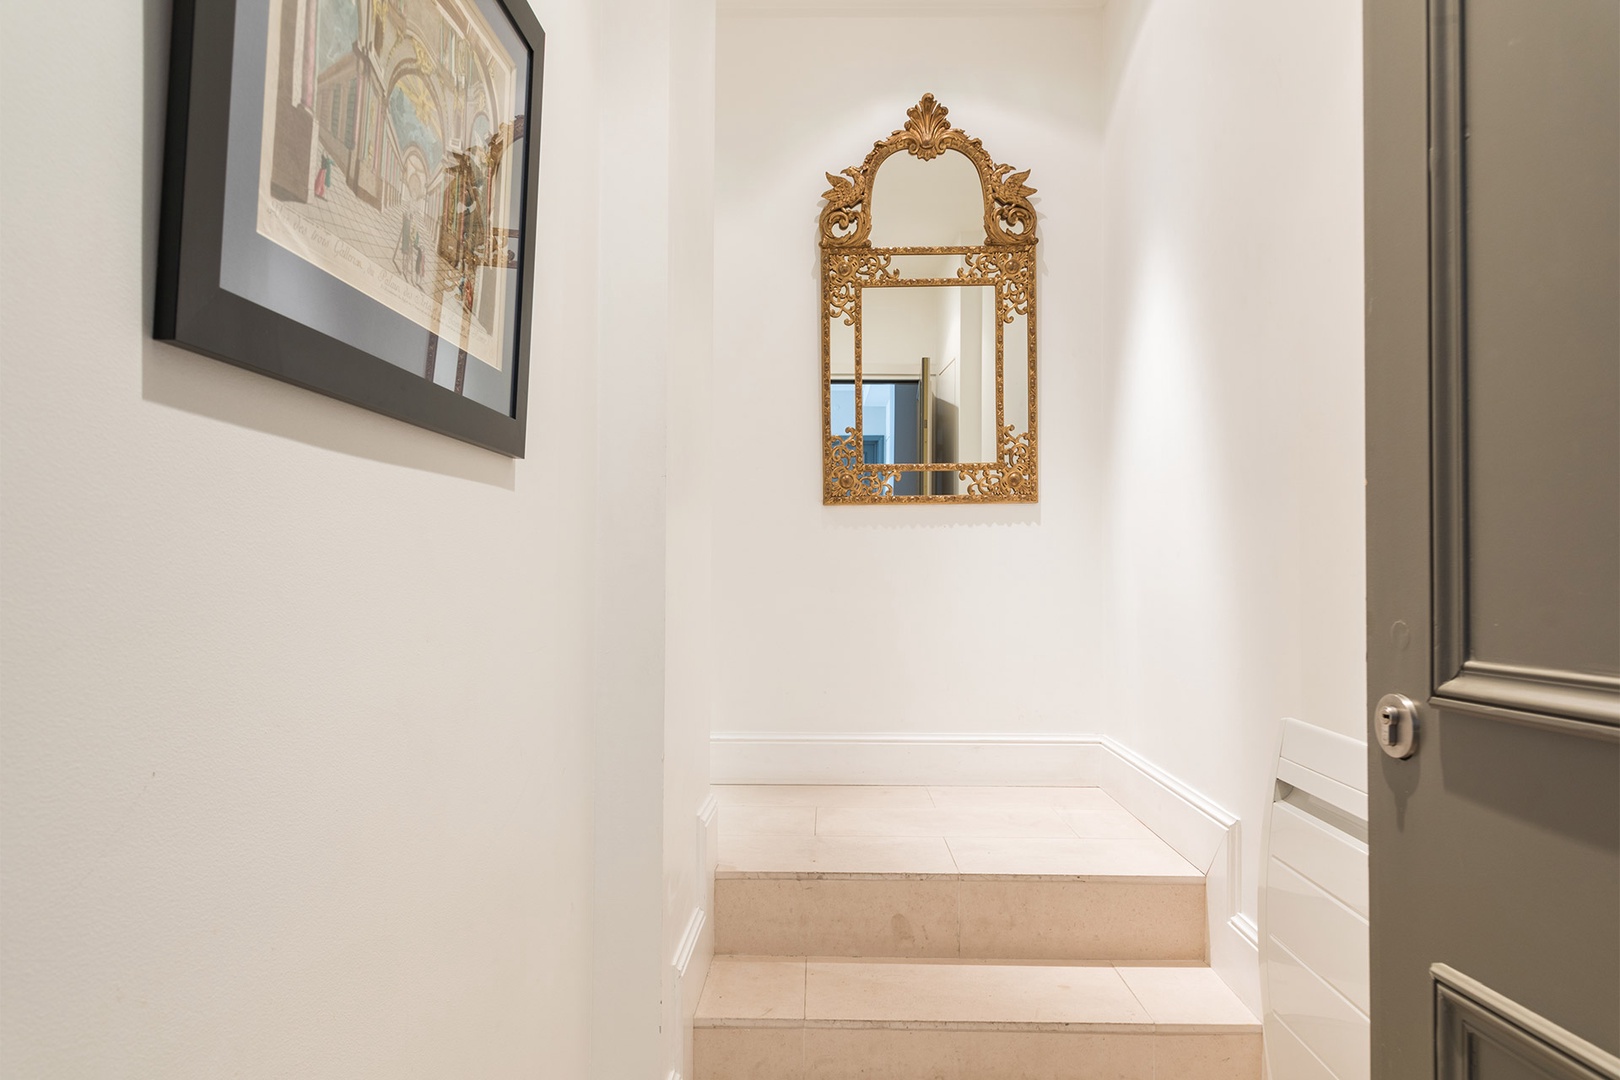 A Belle Epoque-styled mirror decorates the entryway.